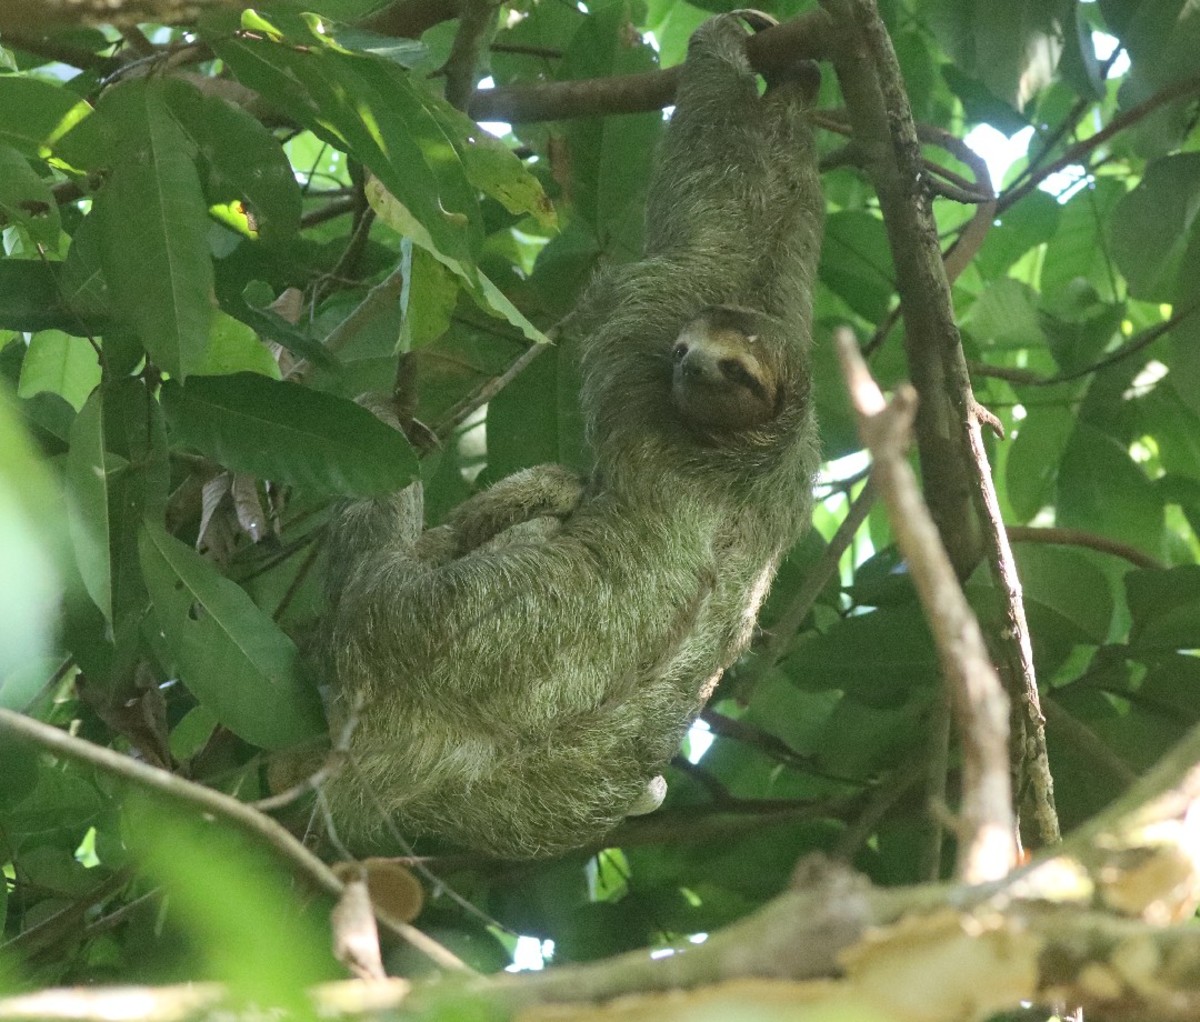 Sloth in a tree in Corcovado National Park